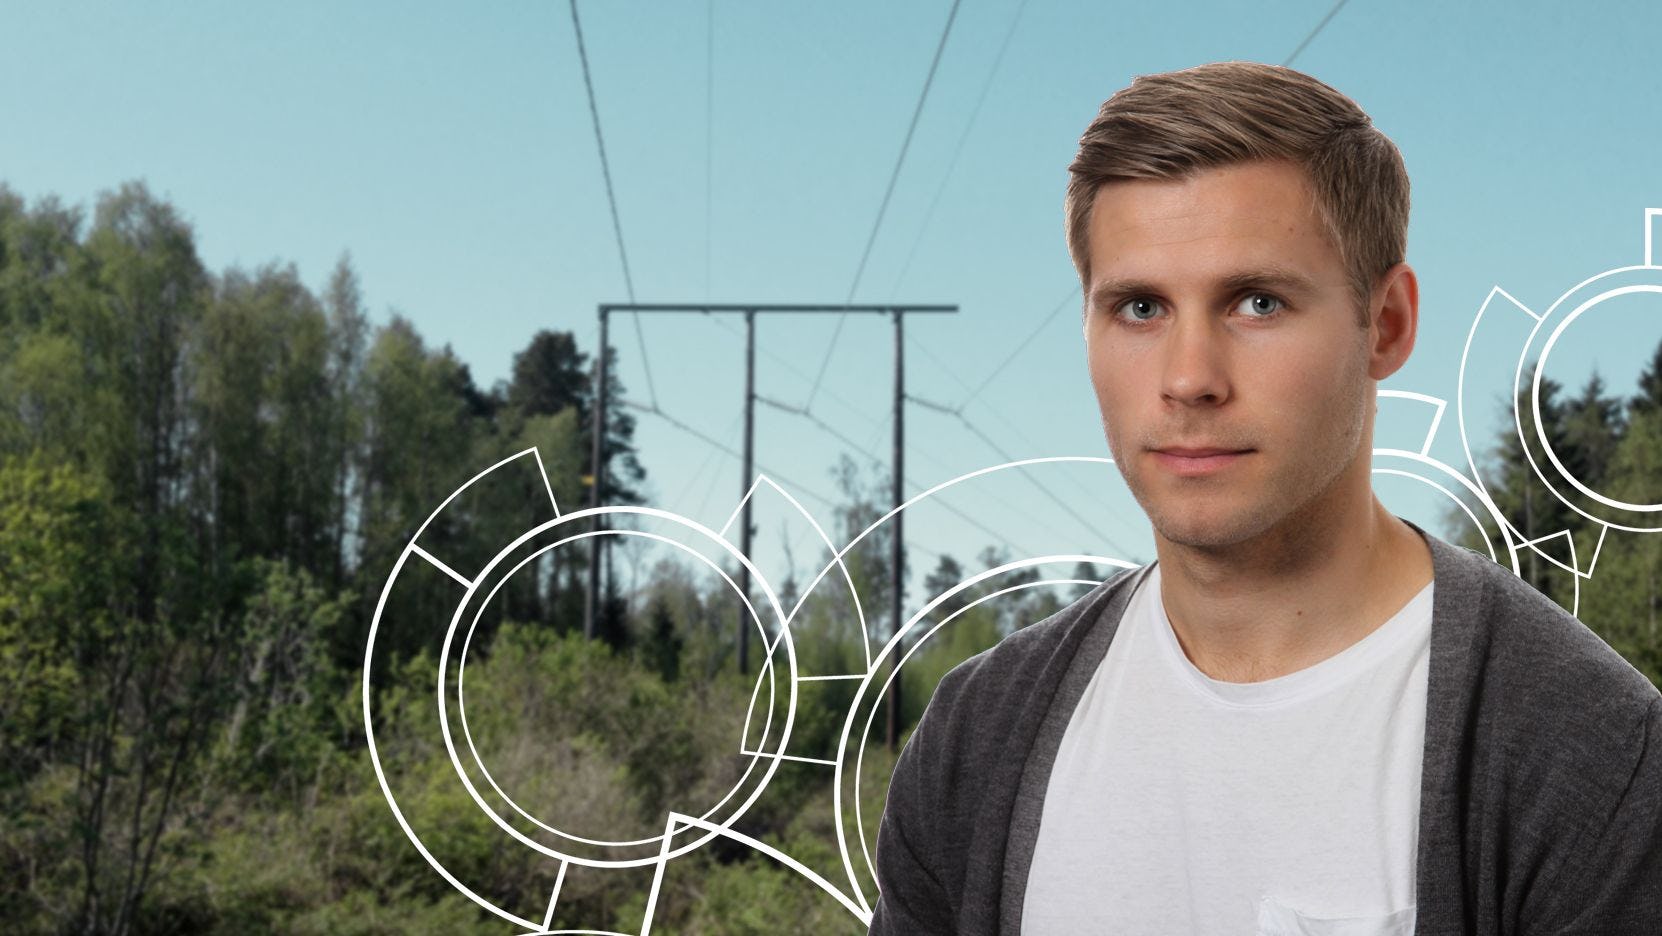 A portrait of a man superimposed on a background of trees and power lines